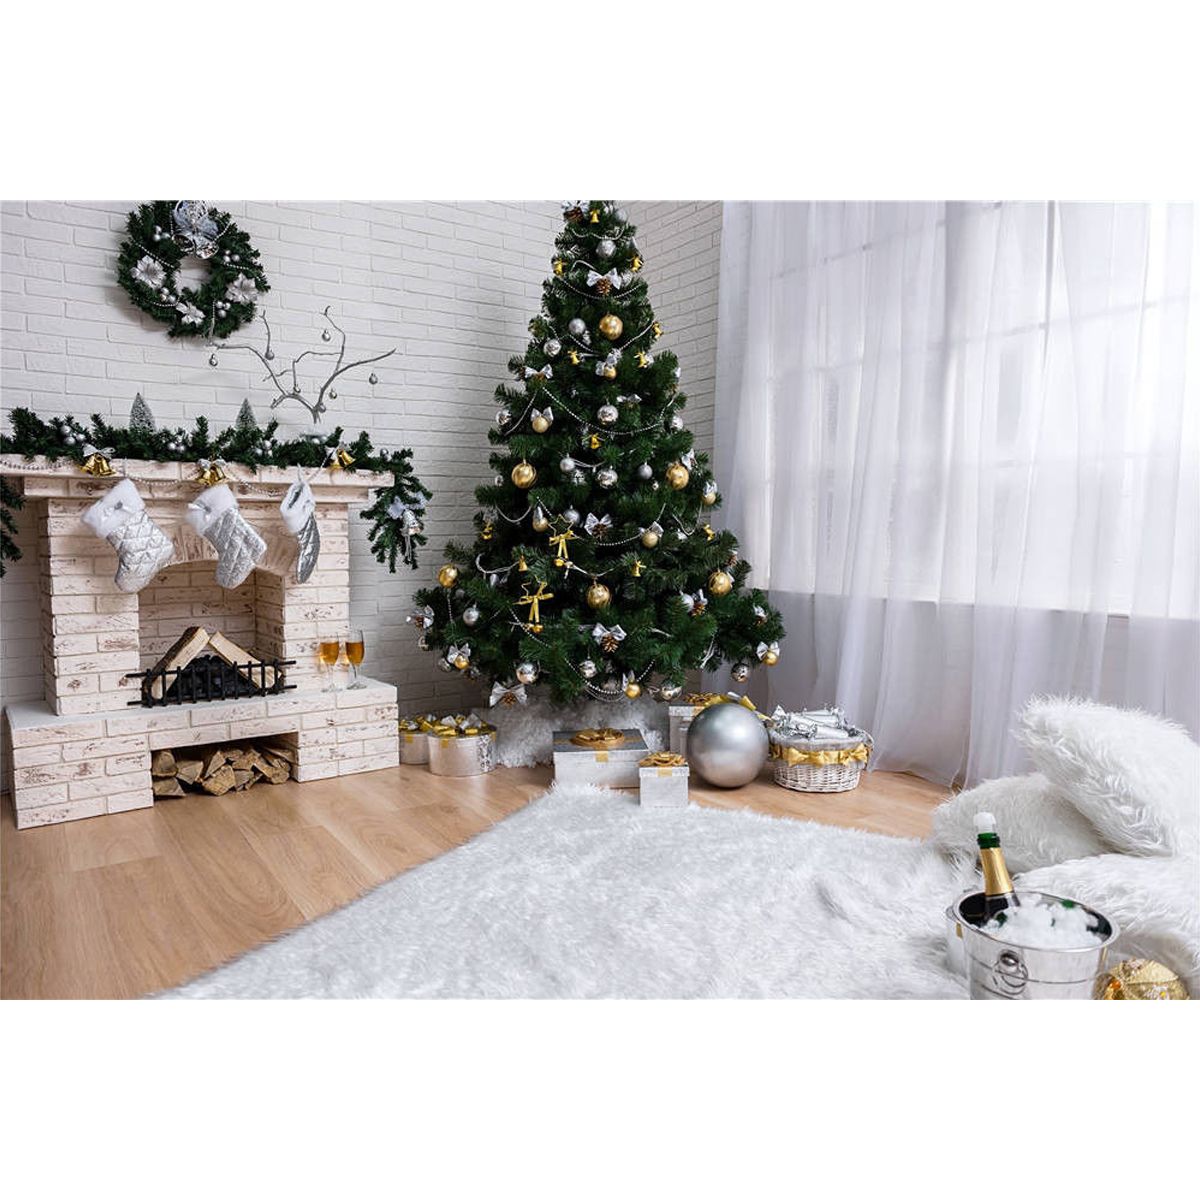 7x5FT-White-Room-Christmas-Tree-Fireplace-Theme-Photography-Backdrop-Studio-Prop-Background-1392171